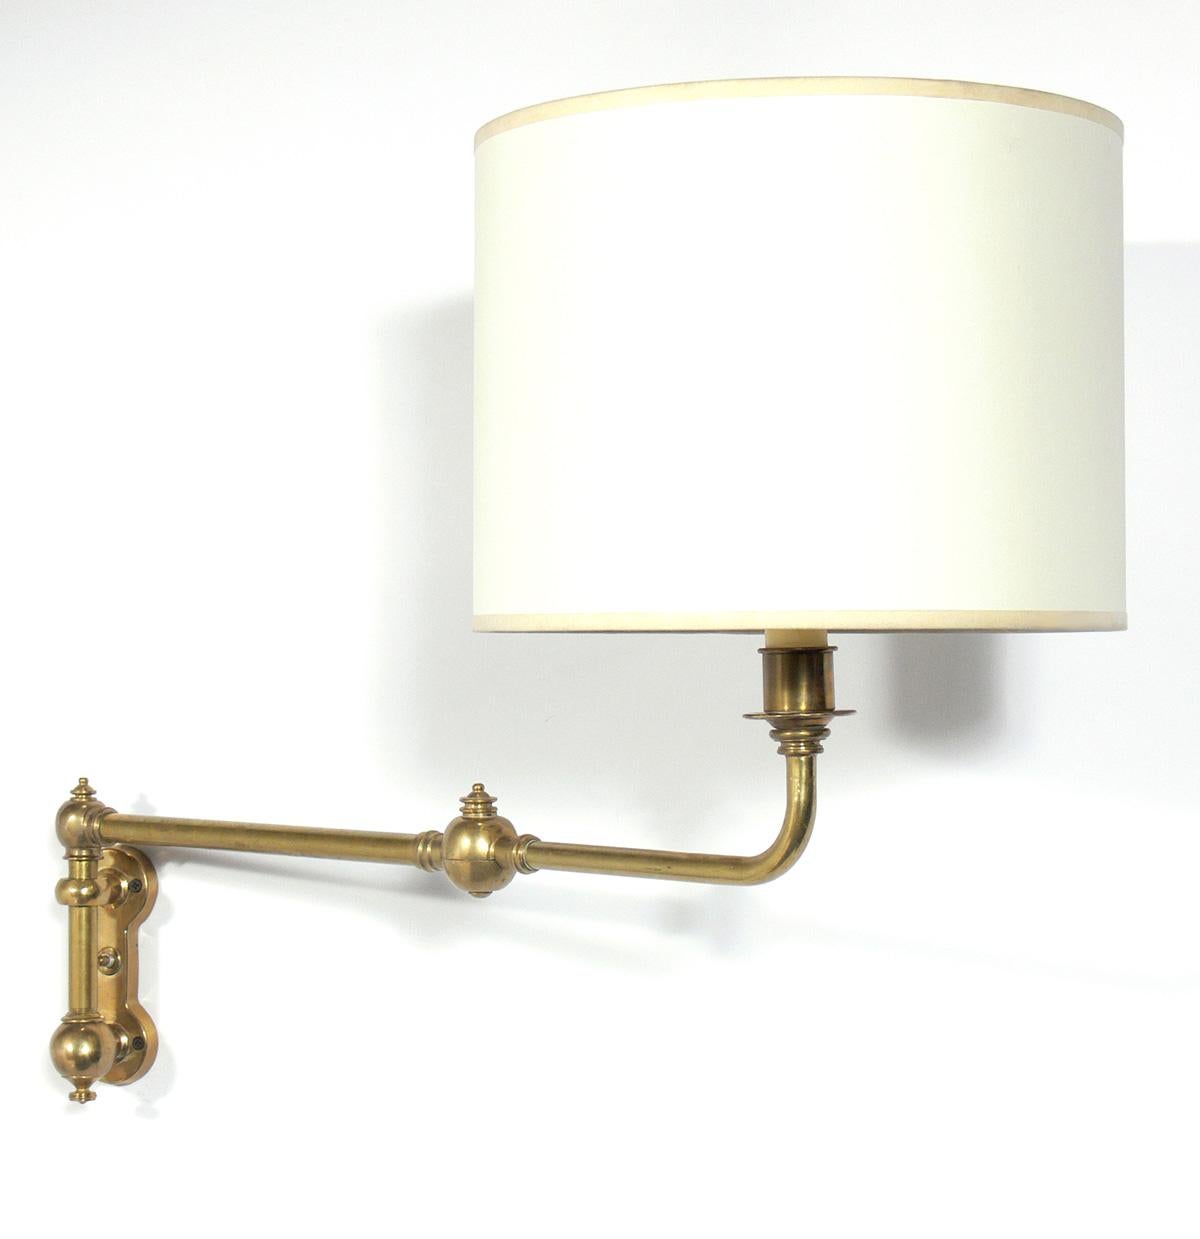 Selection of Brass Swing Arm Sconces, American, circa 1960s. They are:
1) Brass sconces, pictured on the top of the first photo. They measure 26